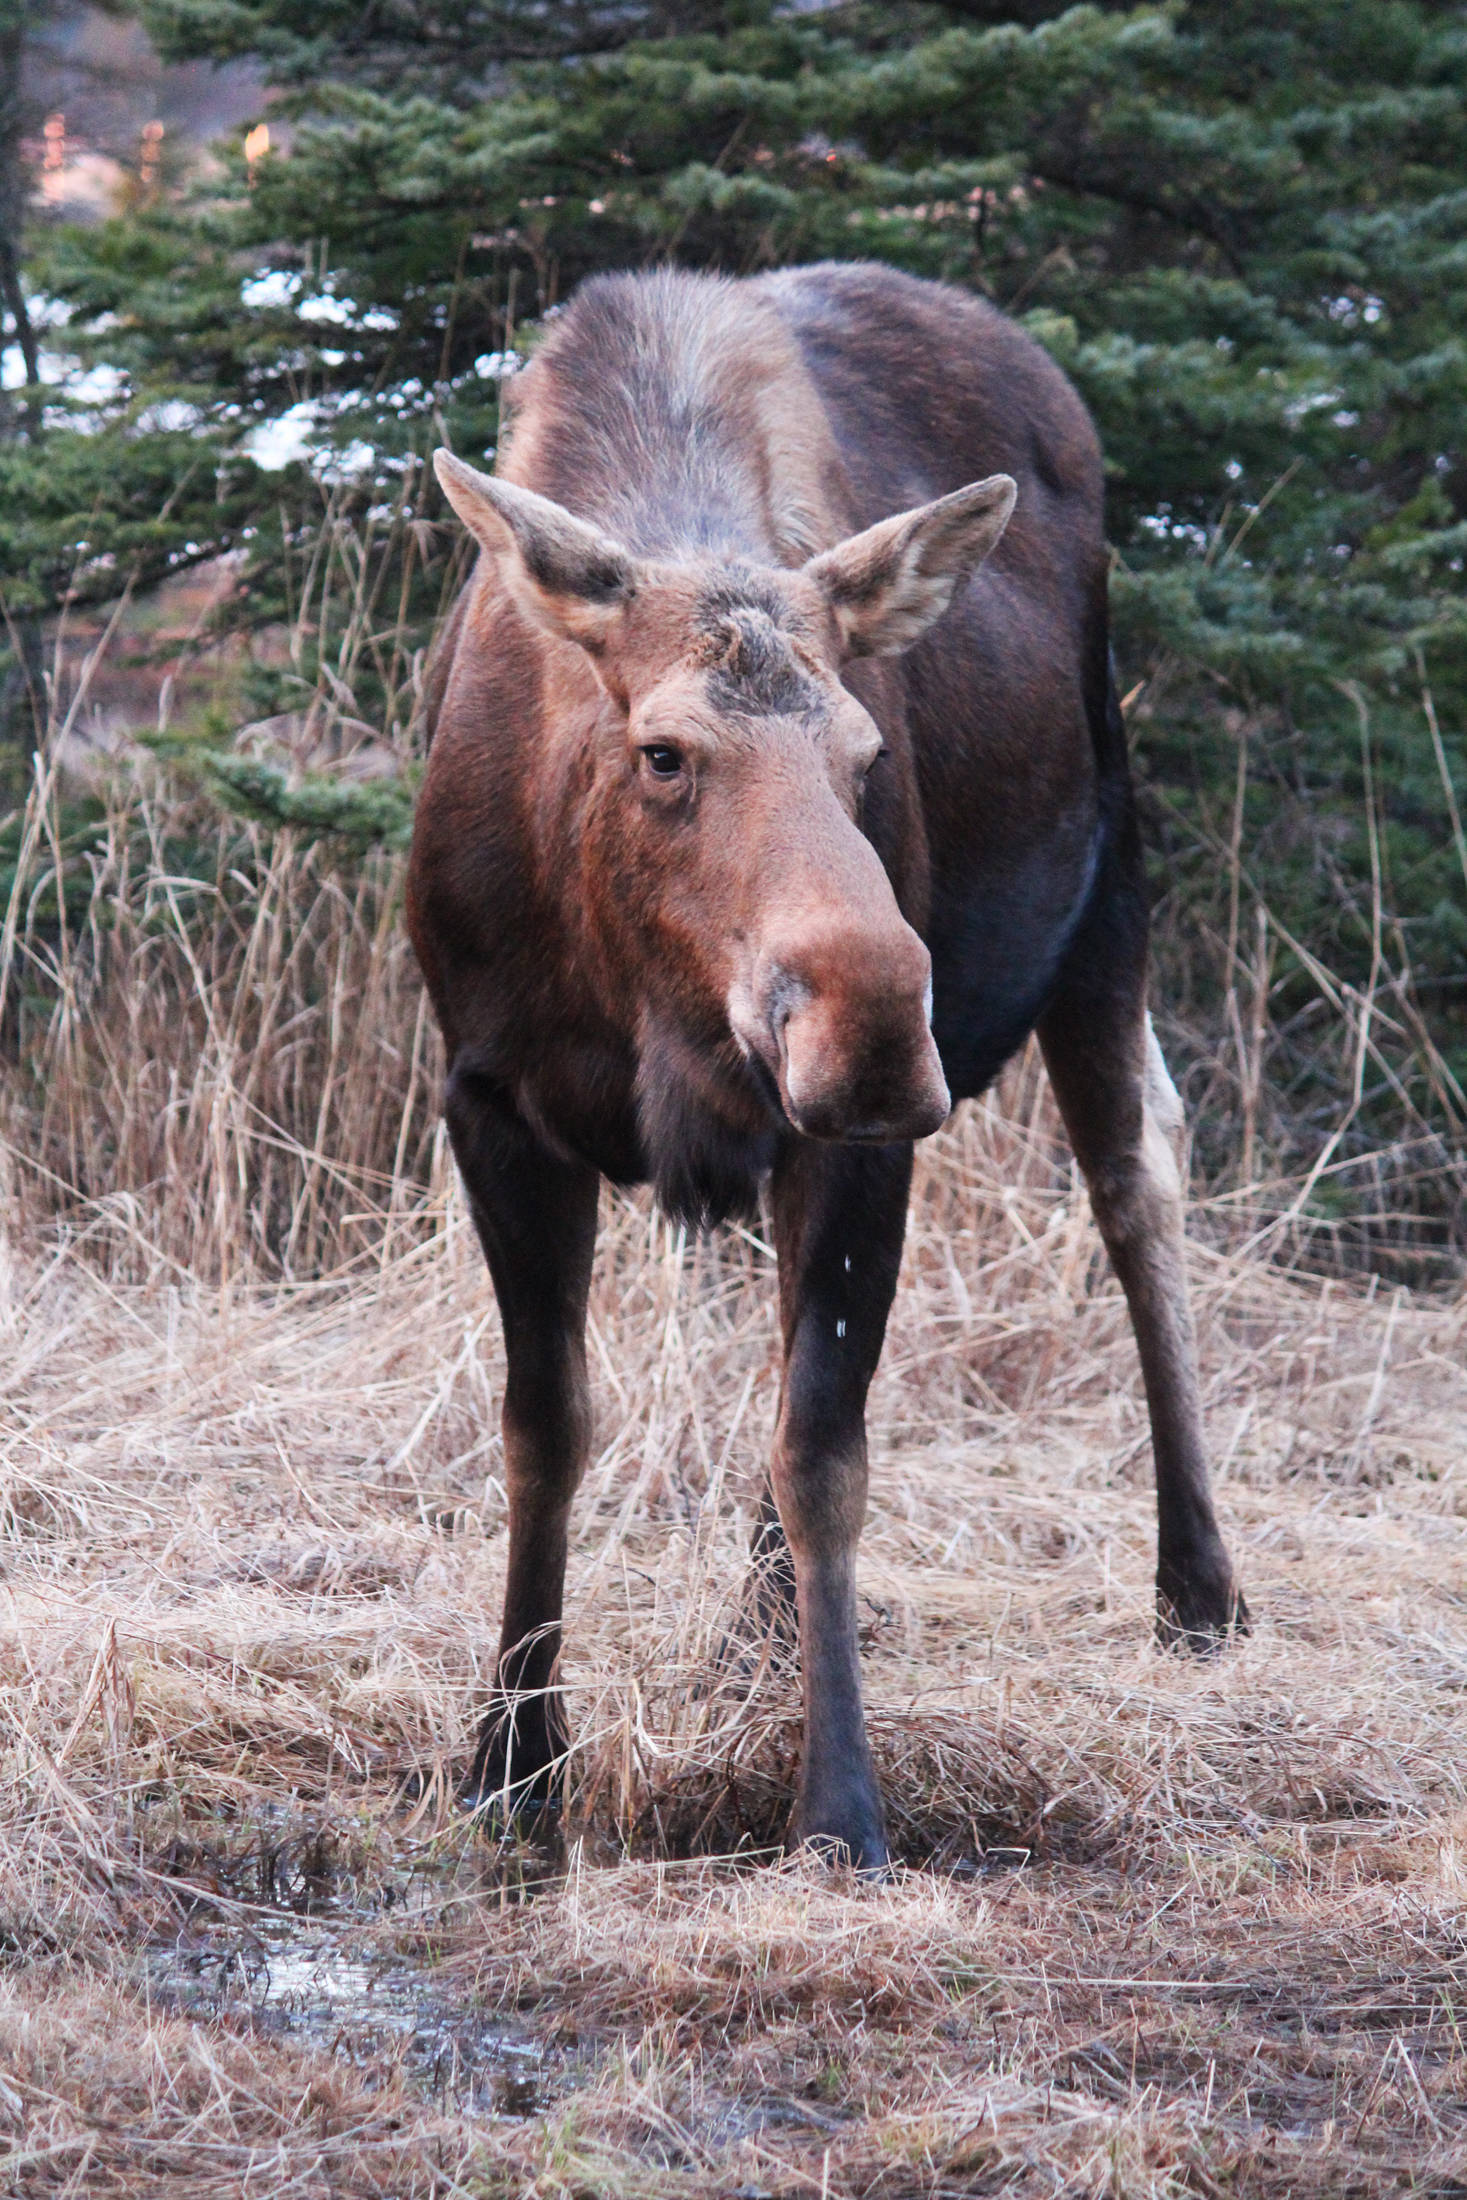 A moose takes a drink of water from a marshy area just off Kachemak Drive on Tuesday, March 19 in Homer. (Photo by Megan Pacer/Homer News)